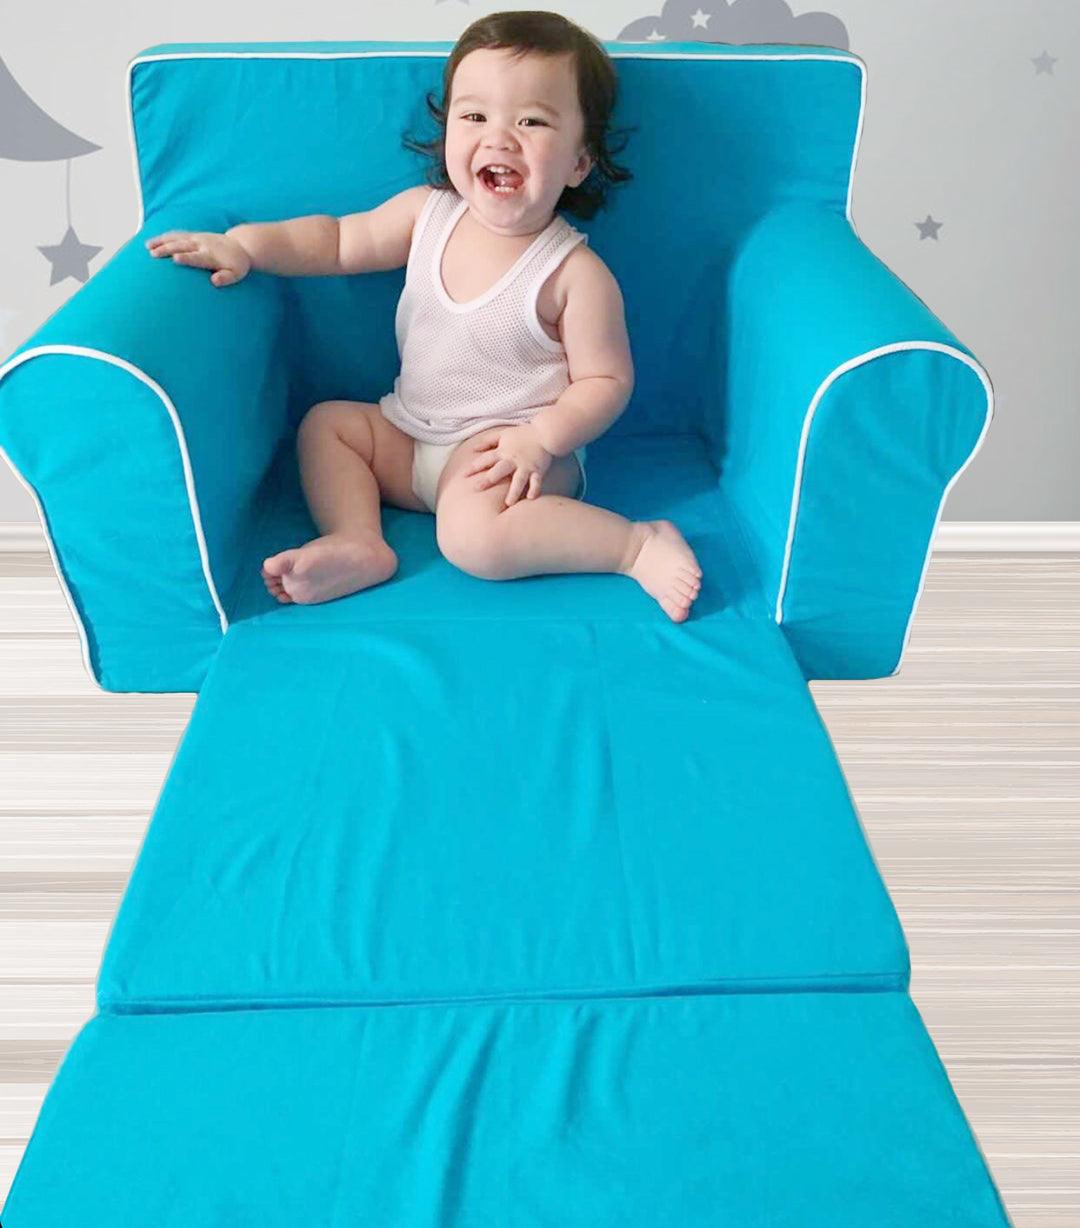 Tiny Winks Kiddie Sofa / Sofabed COVER - Cotton Canvas (Made to order) | The Nest Attachment Parenting Hub